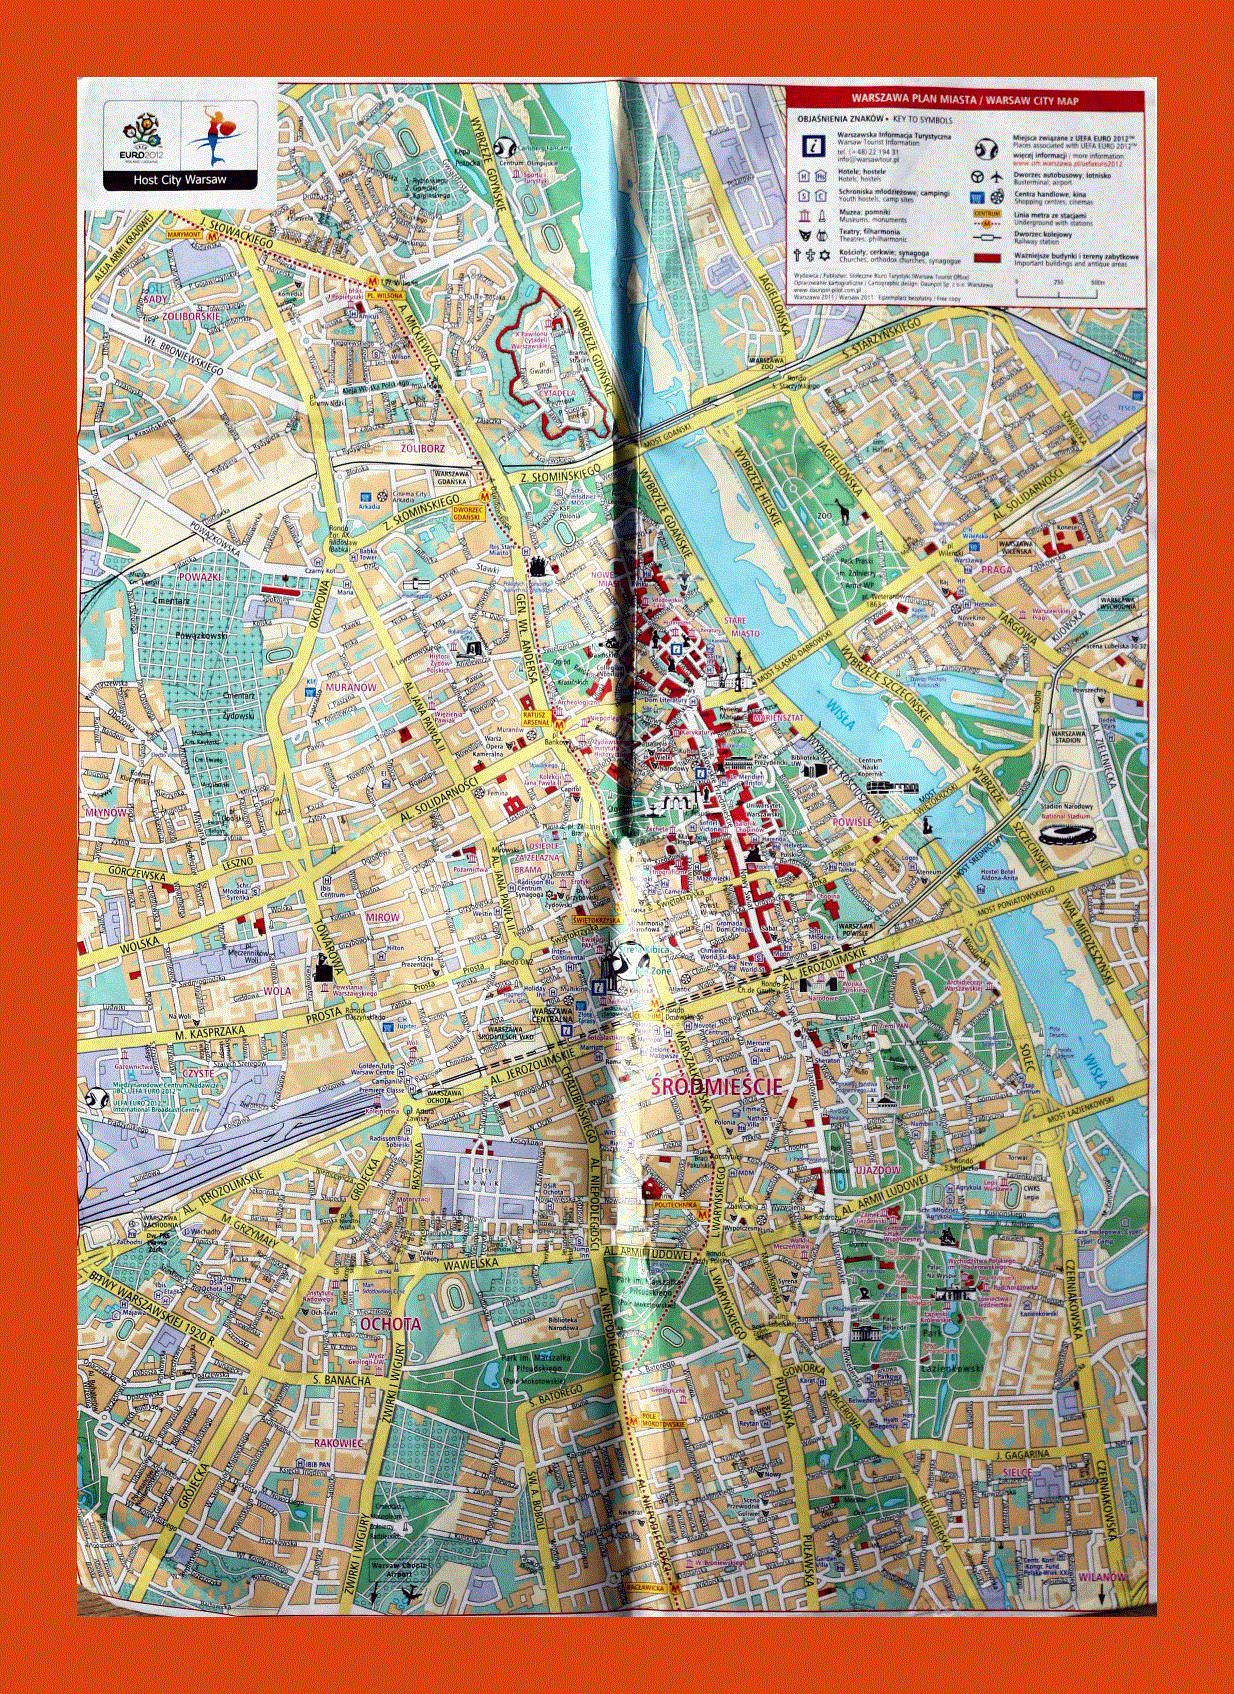 Guide map of central part of Warsaw city